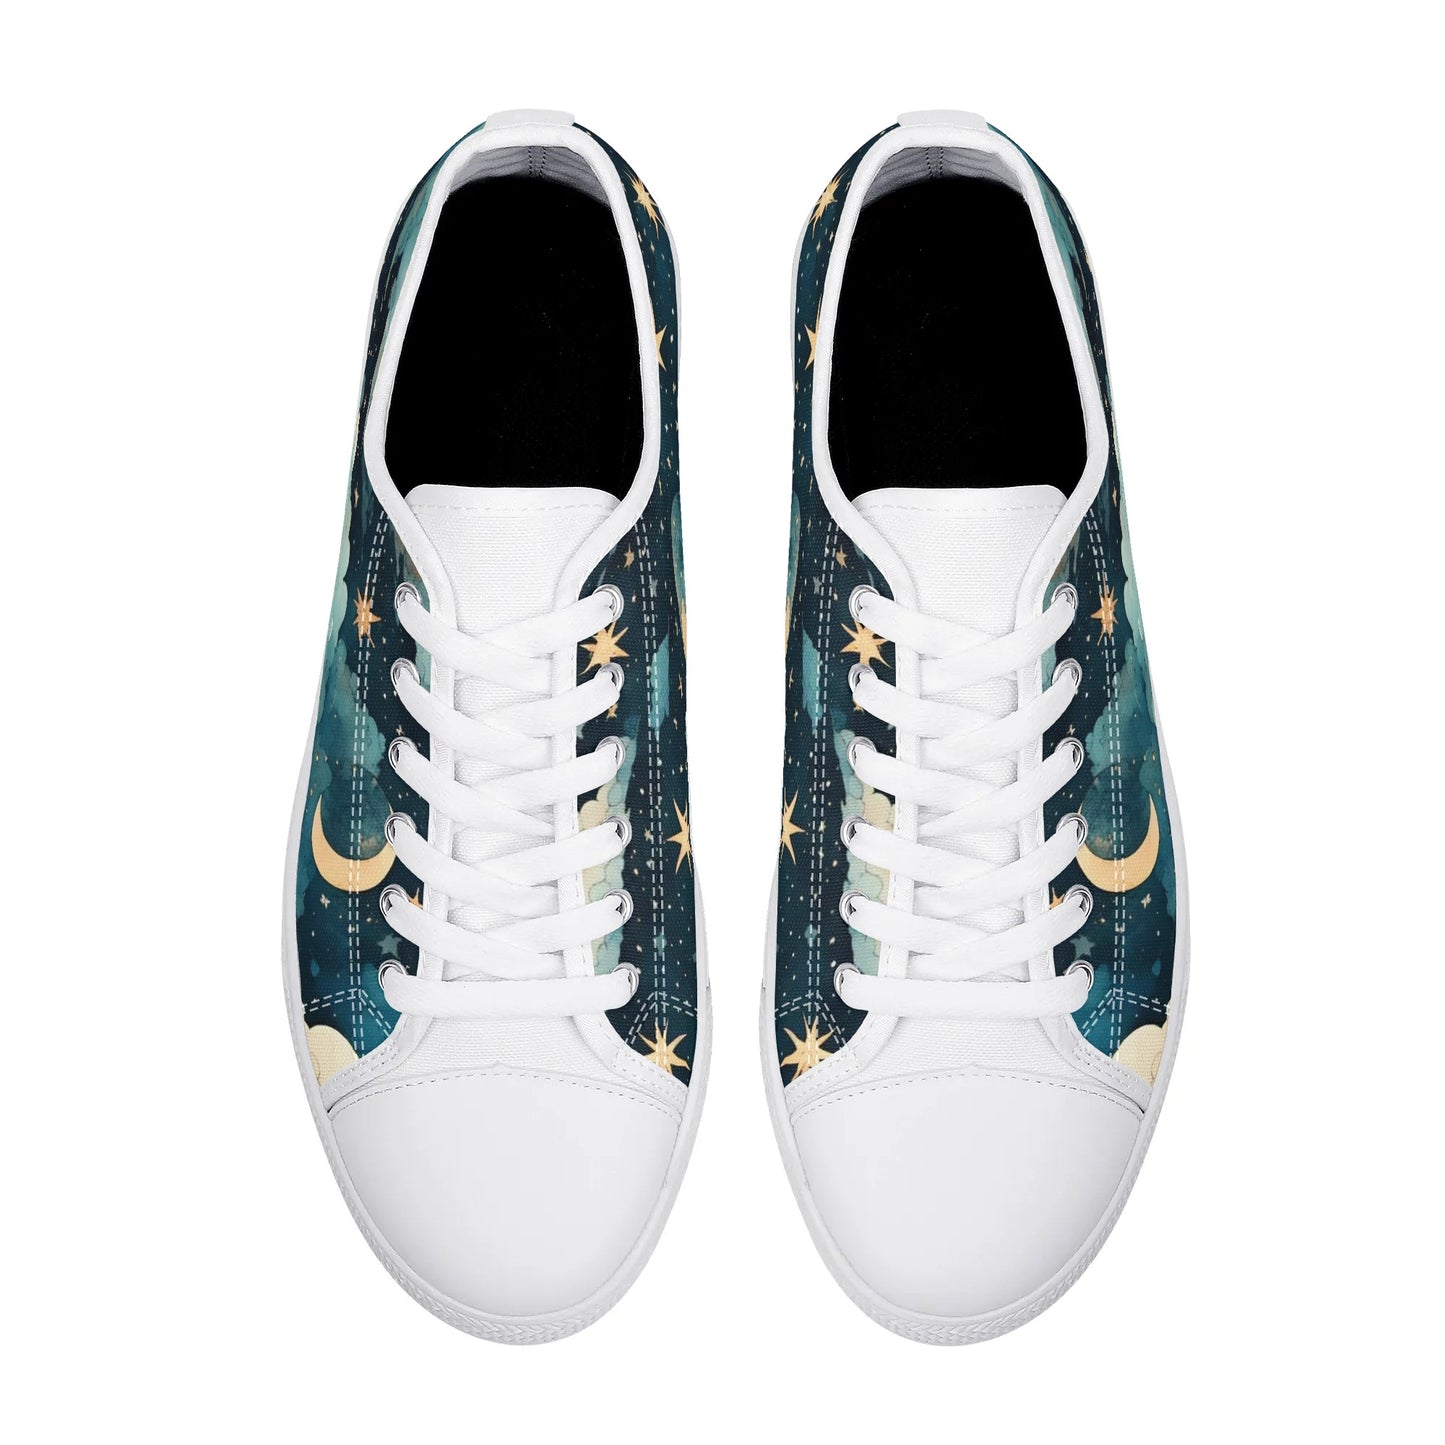 Celestial Blue Clouds Sky Womens Rubber Low Top Sneakers